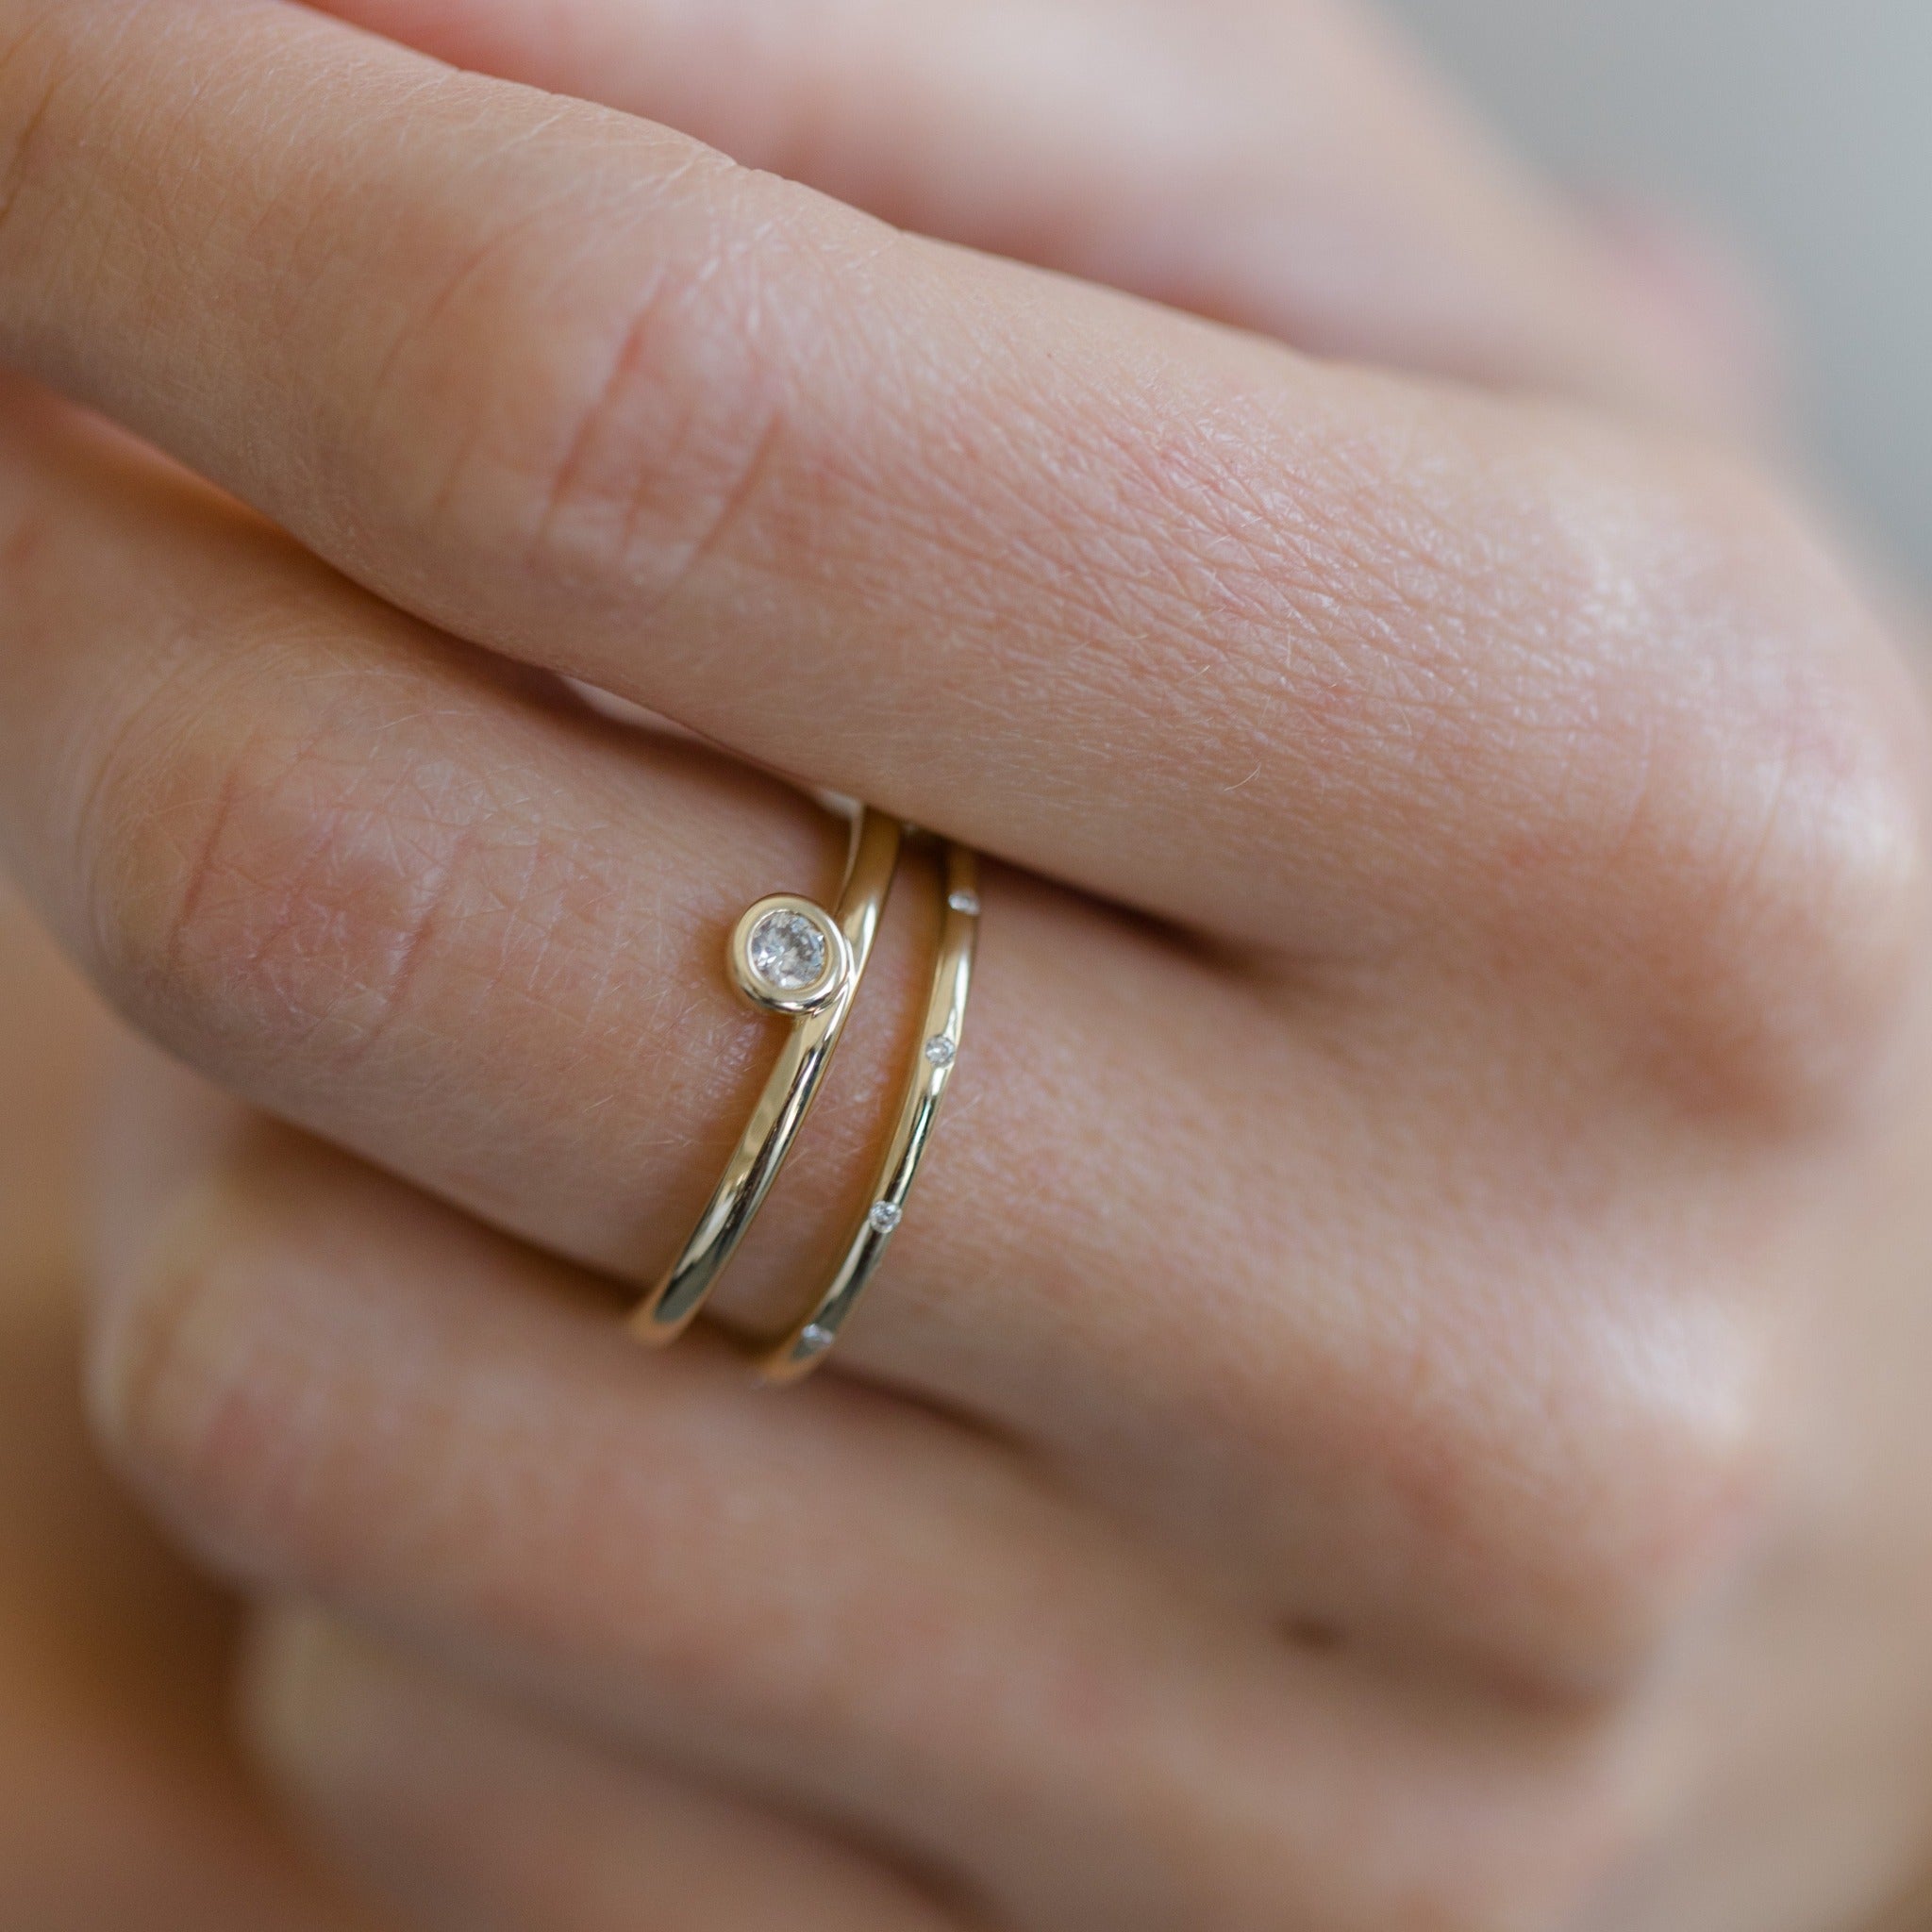 It can also be stacked with other diamond rings. It is a simple and modern diamond ring that works well stacking with other ring styles. Made with recycled 14k yellow gold.